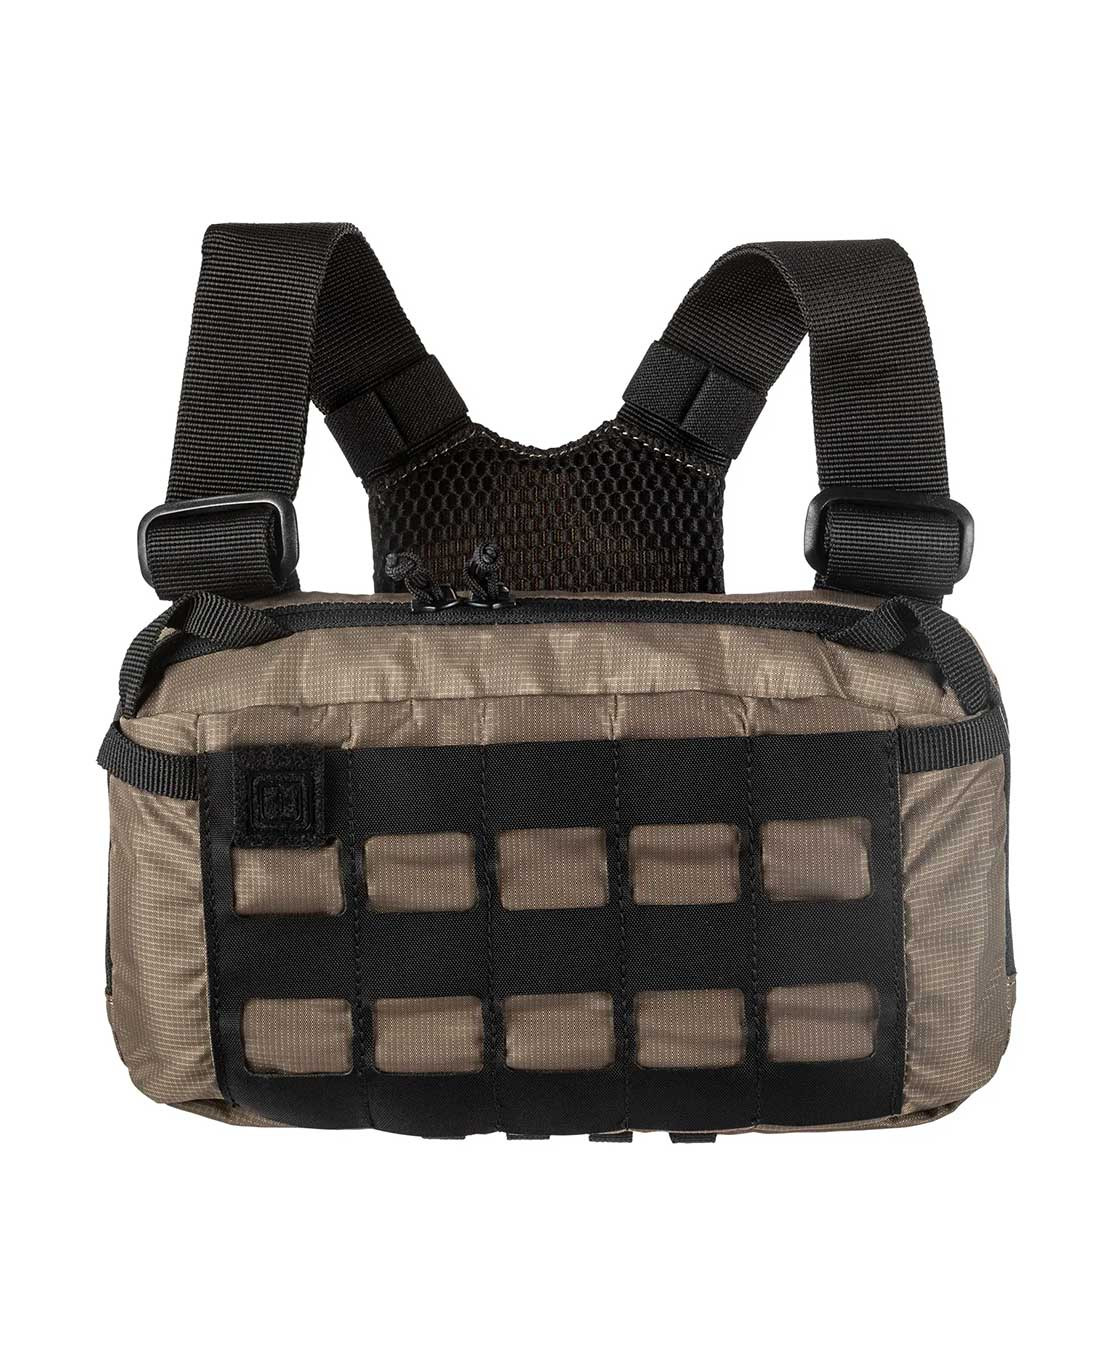 5.11 Tactical Skyweight Survival Chest Pack Major Brown - 56769.367 - TACWRK